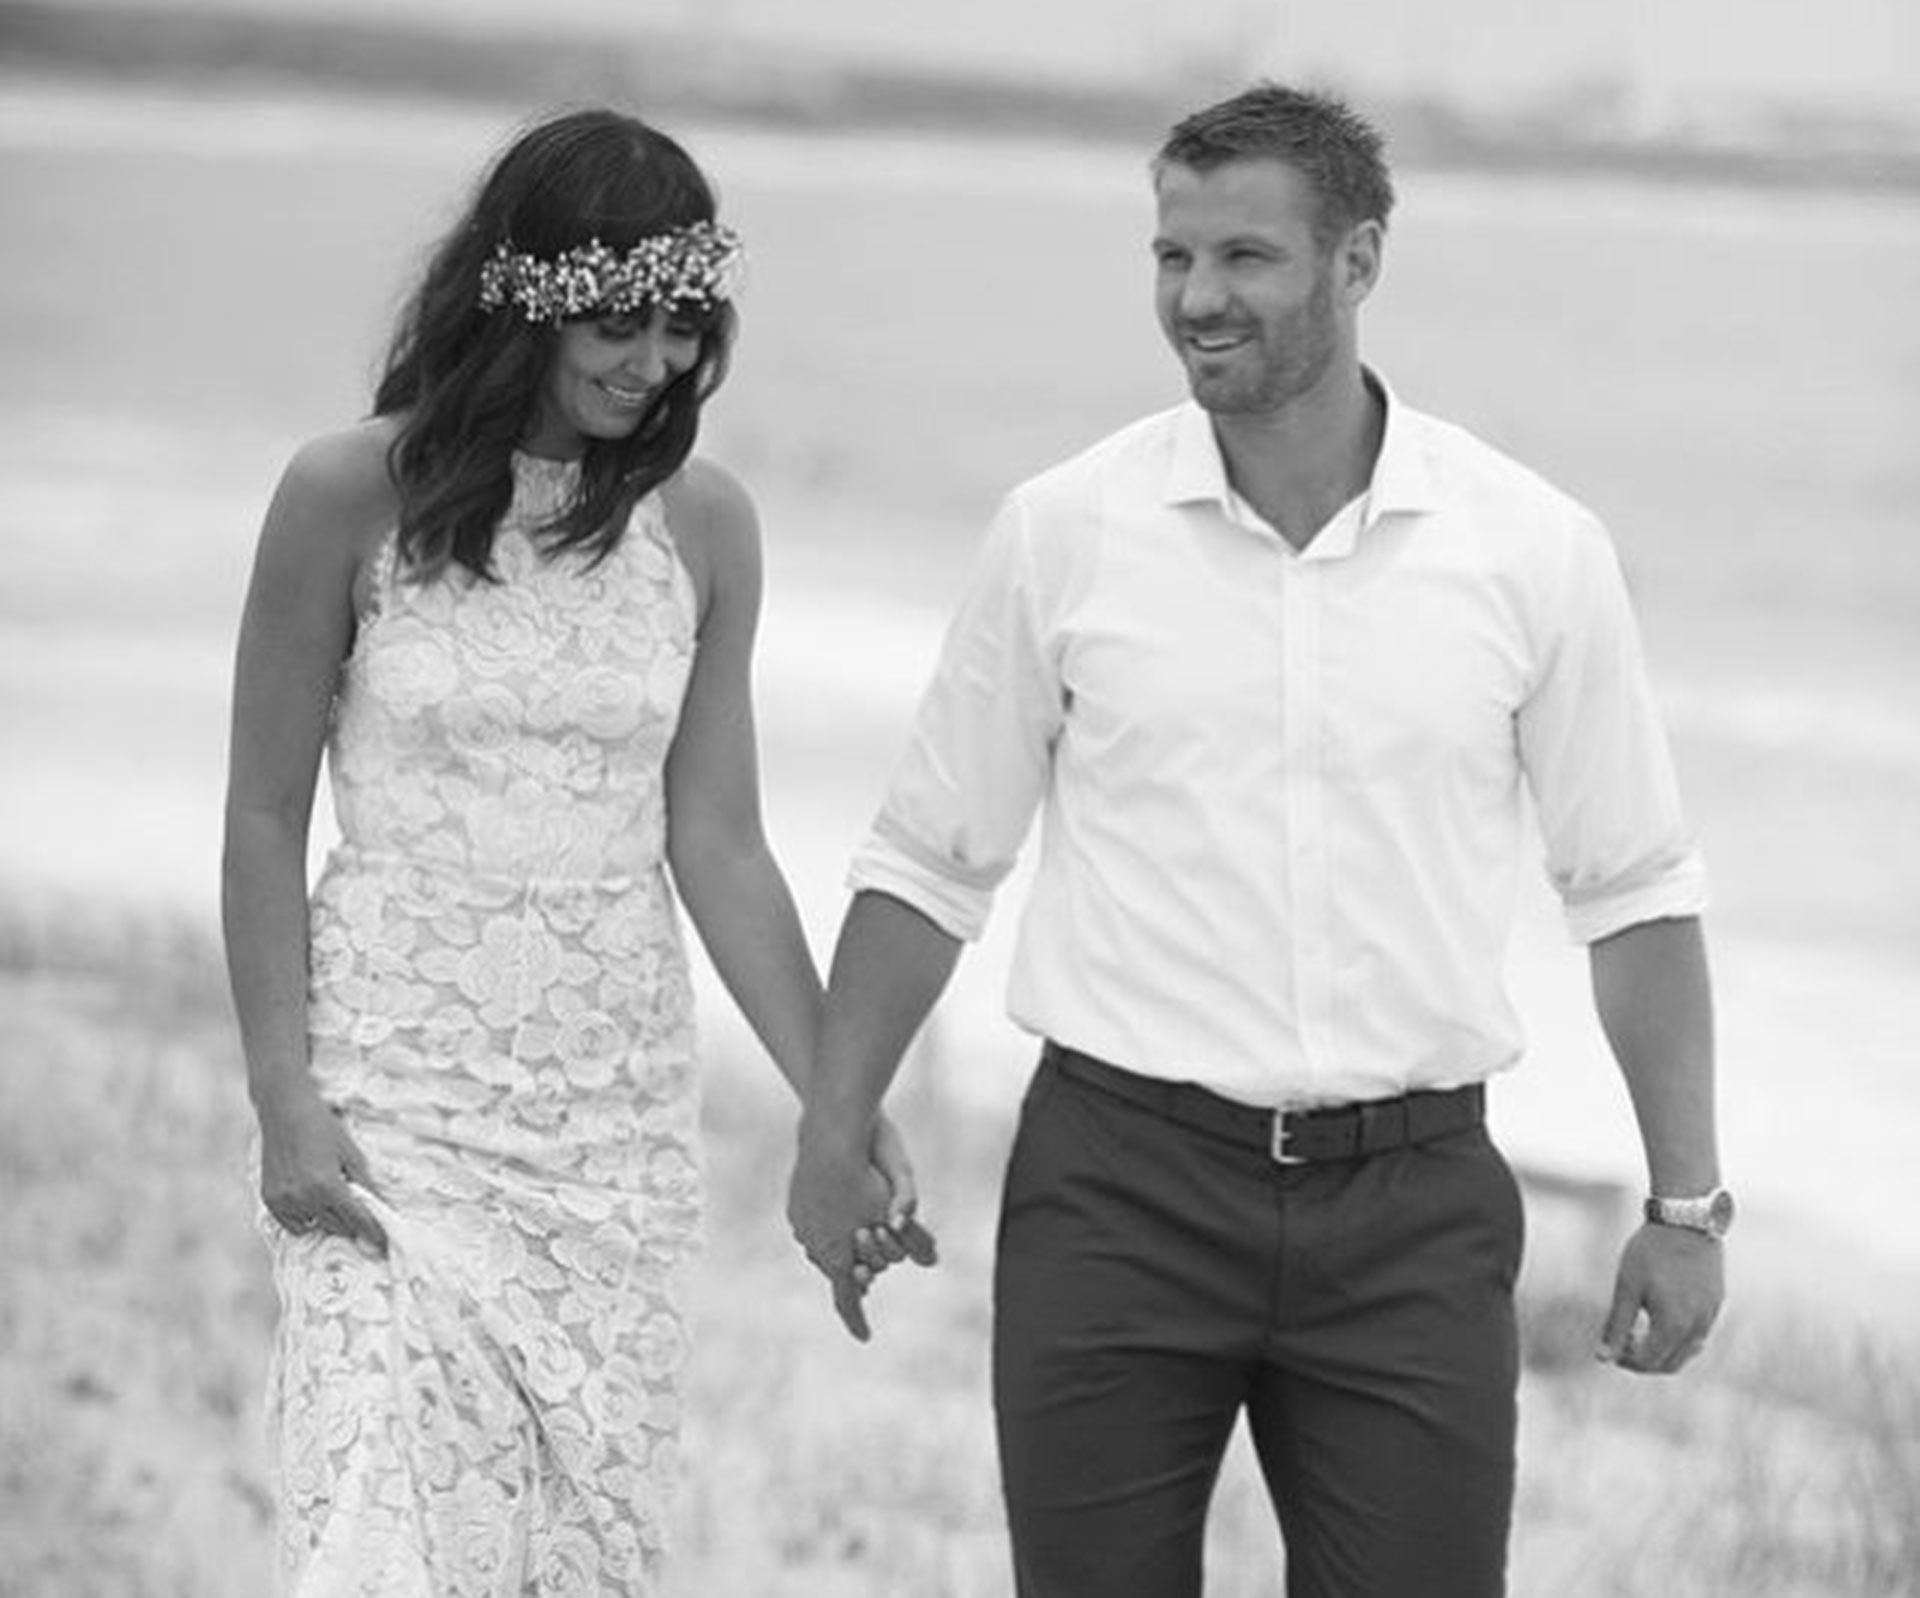 Married at first sight's Michelle on her wedding day 